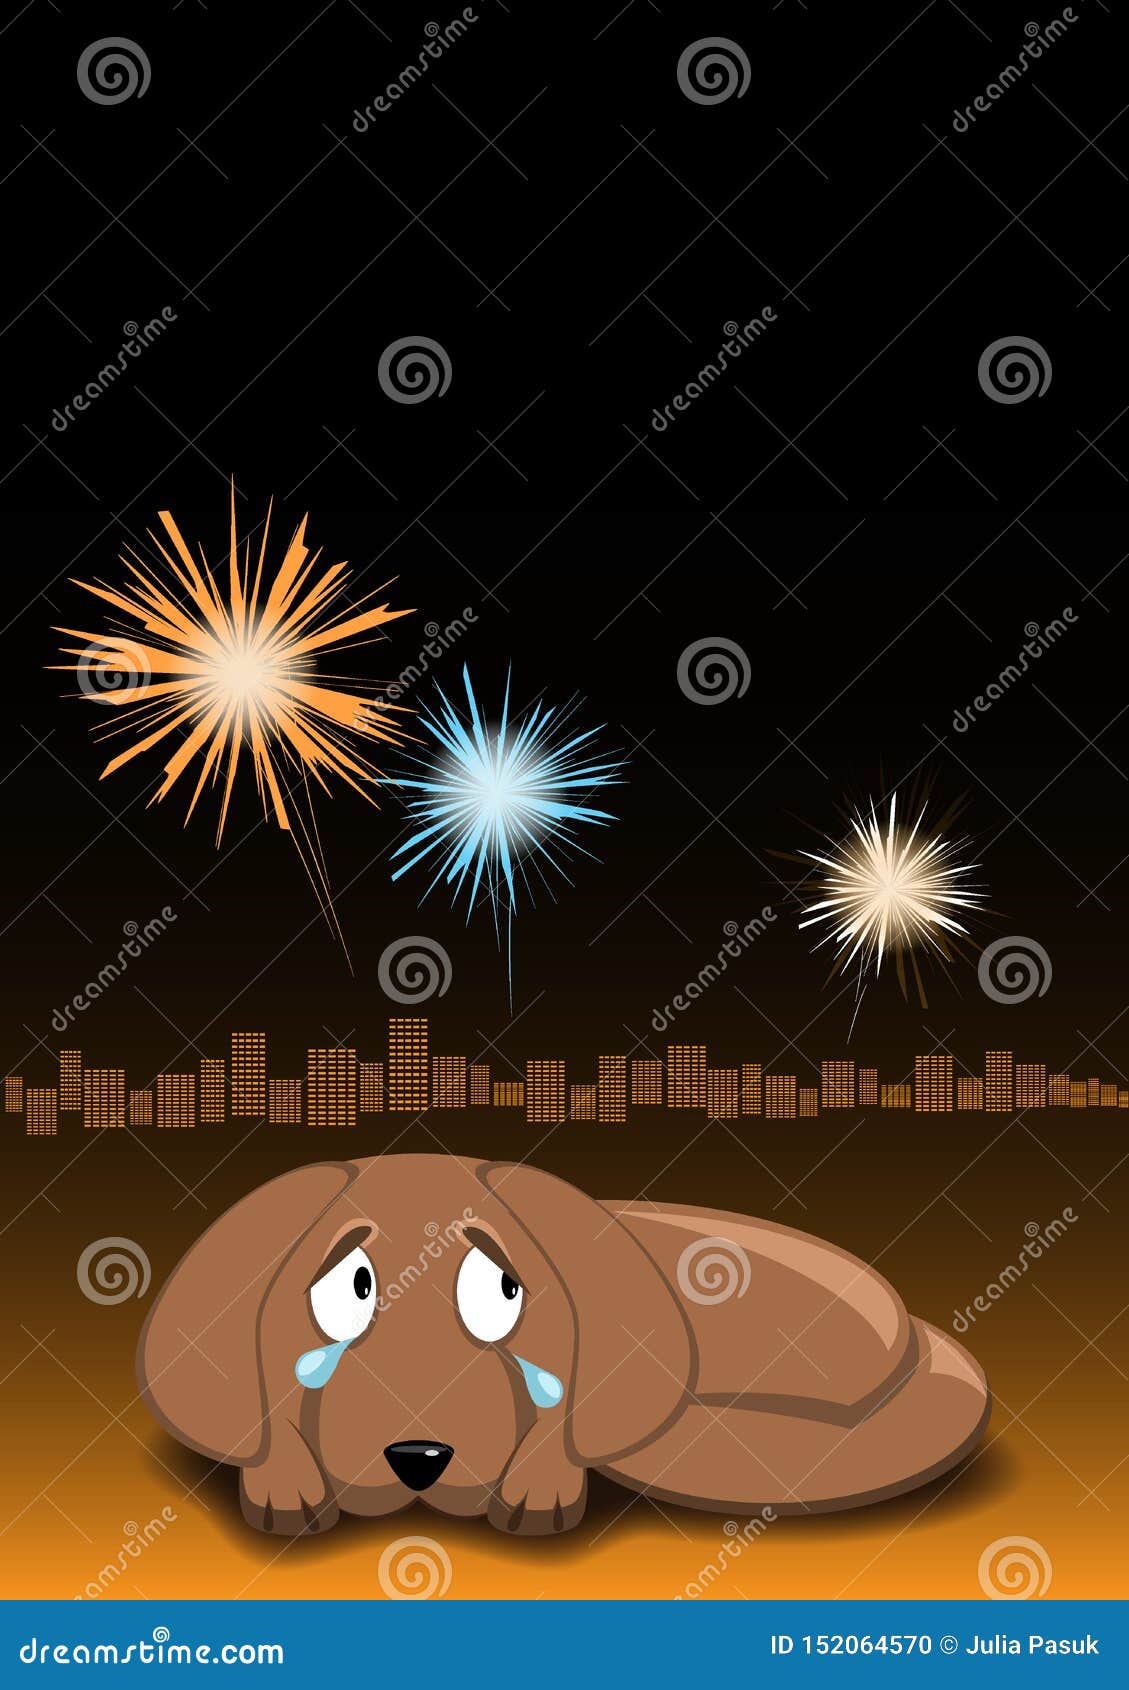 dog is afraid of fireworks and crying. dogs afraid din sounds. night sky, fireworks and city lights on background.  image